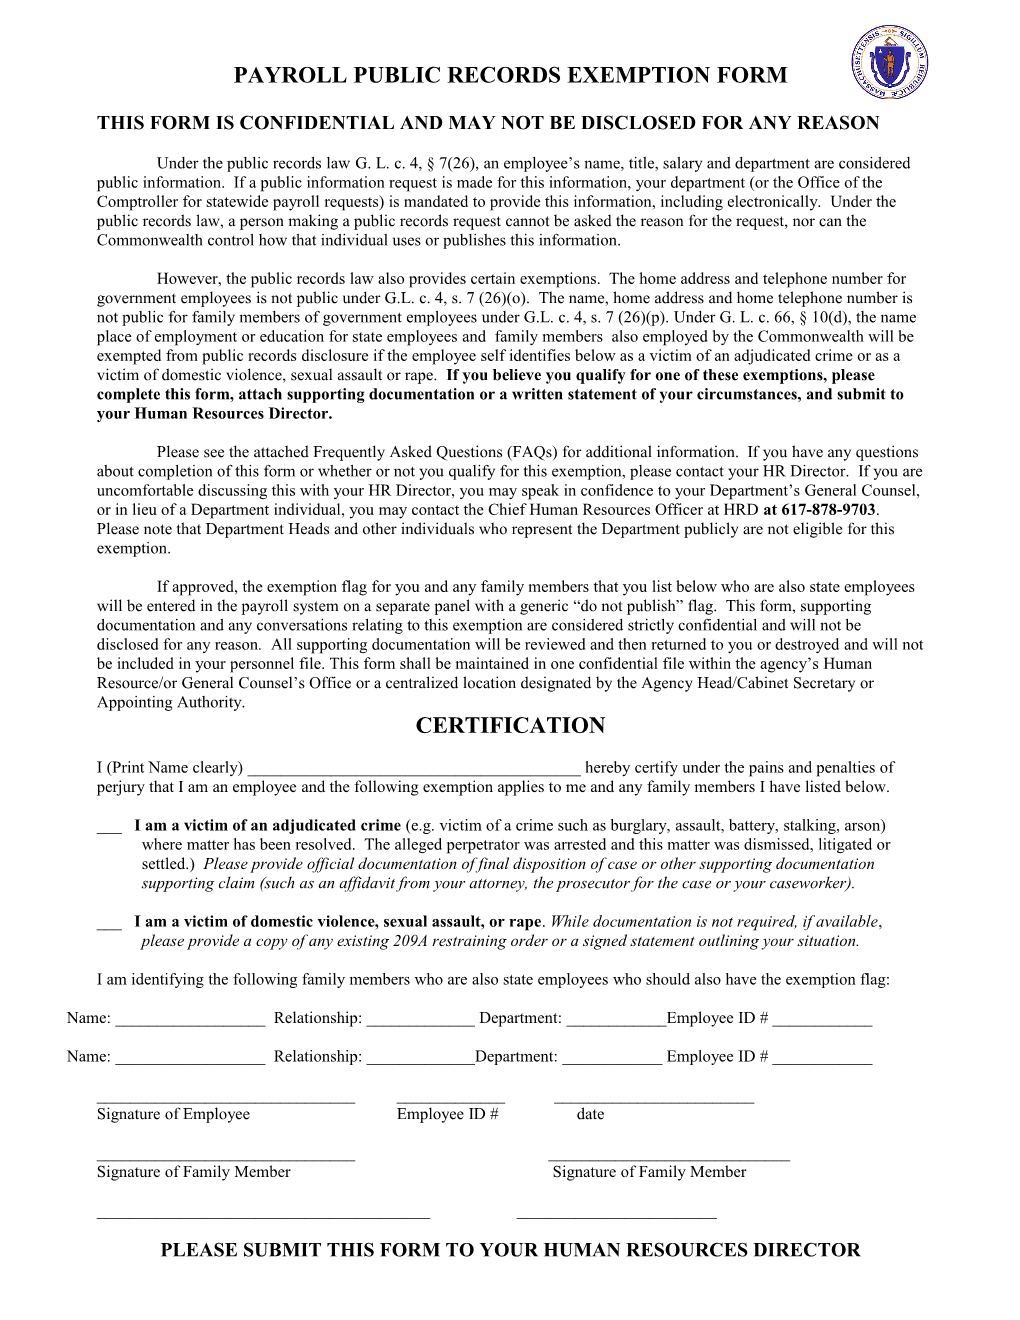 Employee Certification Form for Exemption from Public Record Disclosure